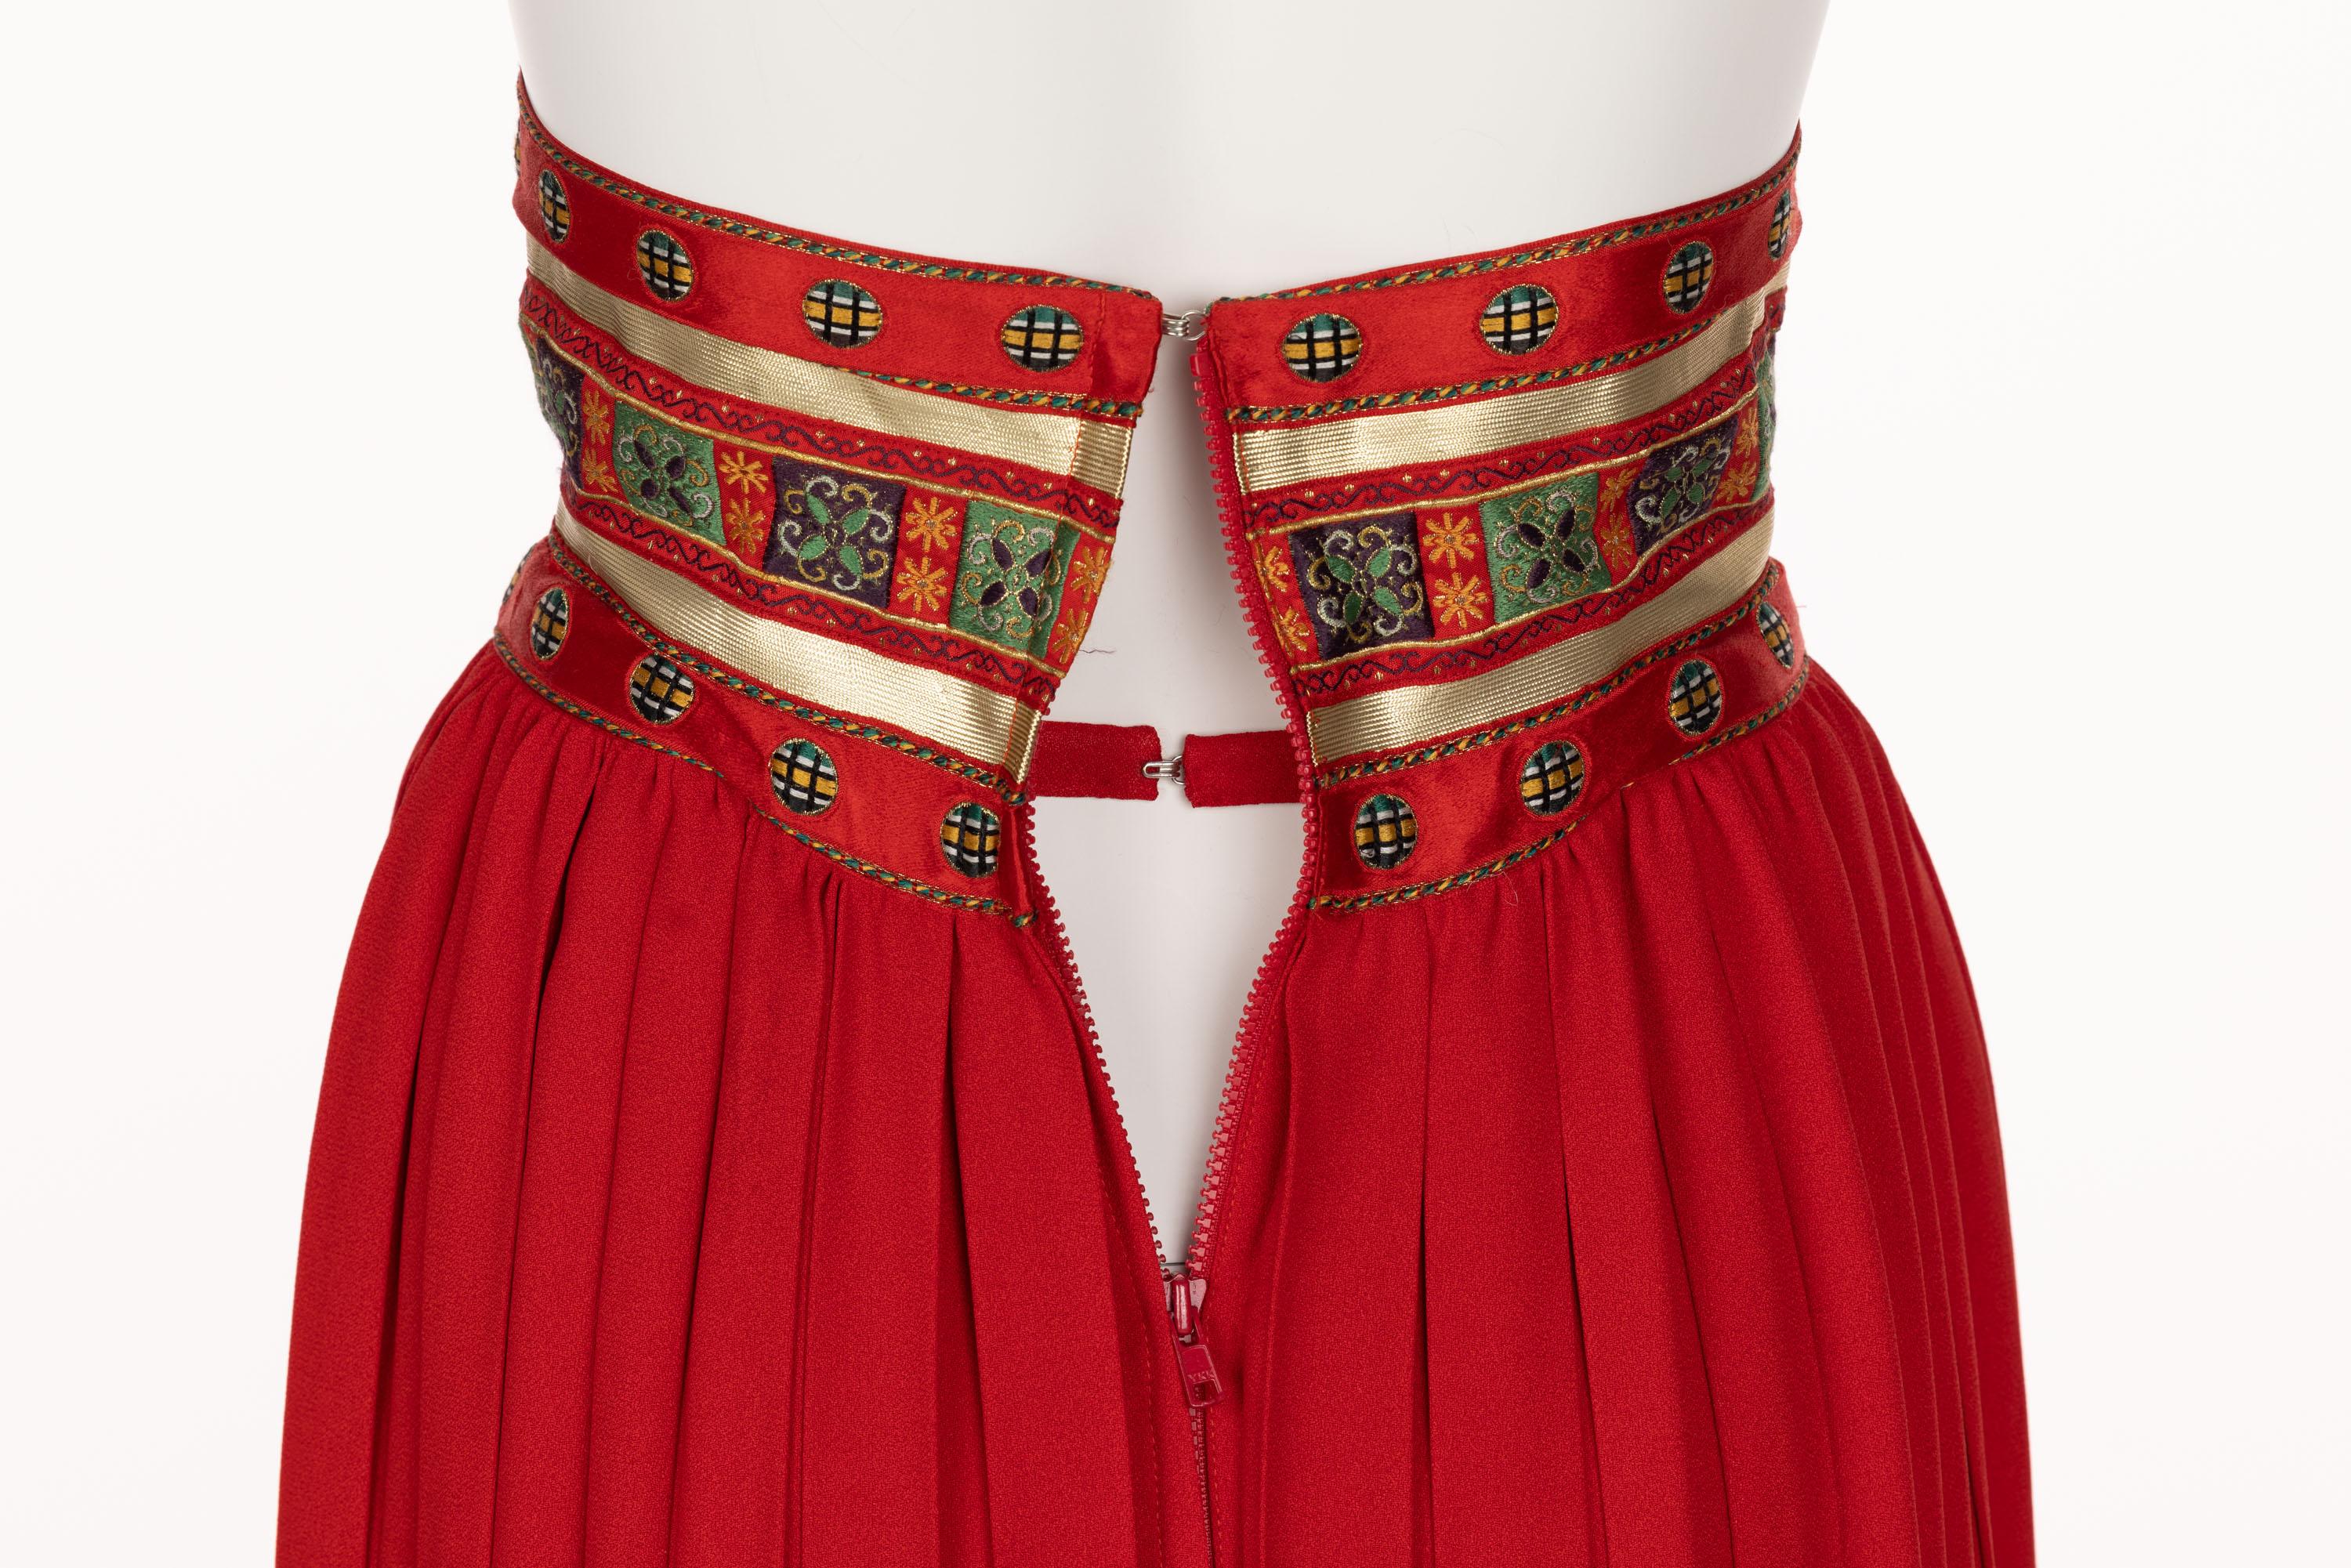 Lanvin Jules-François Crahay Demi Couture Red Pleated Brocade Maxi Skirt 1970s For Sale 2